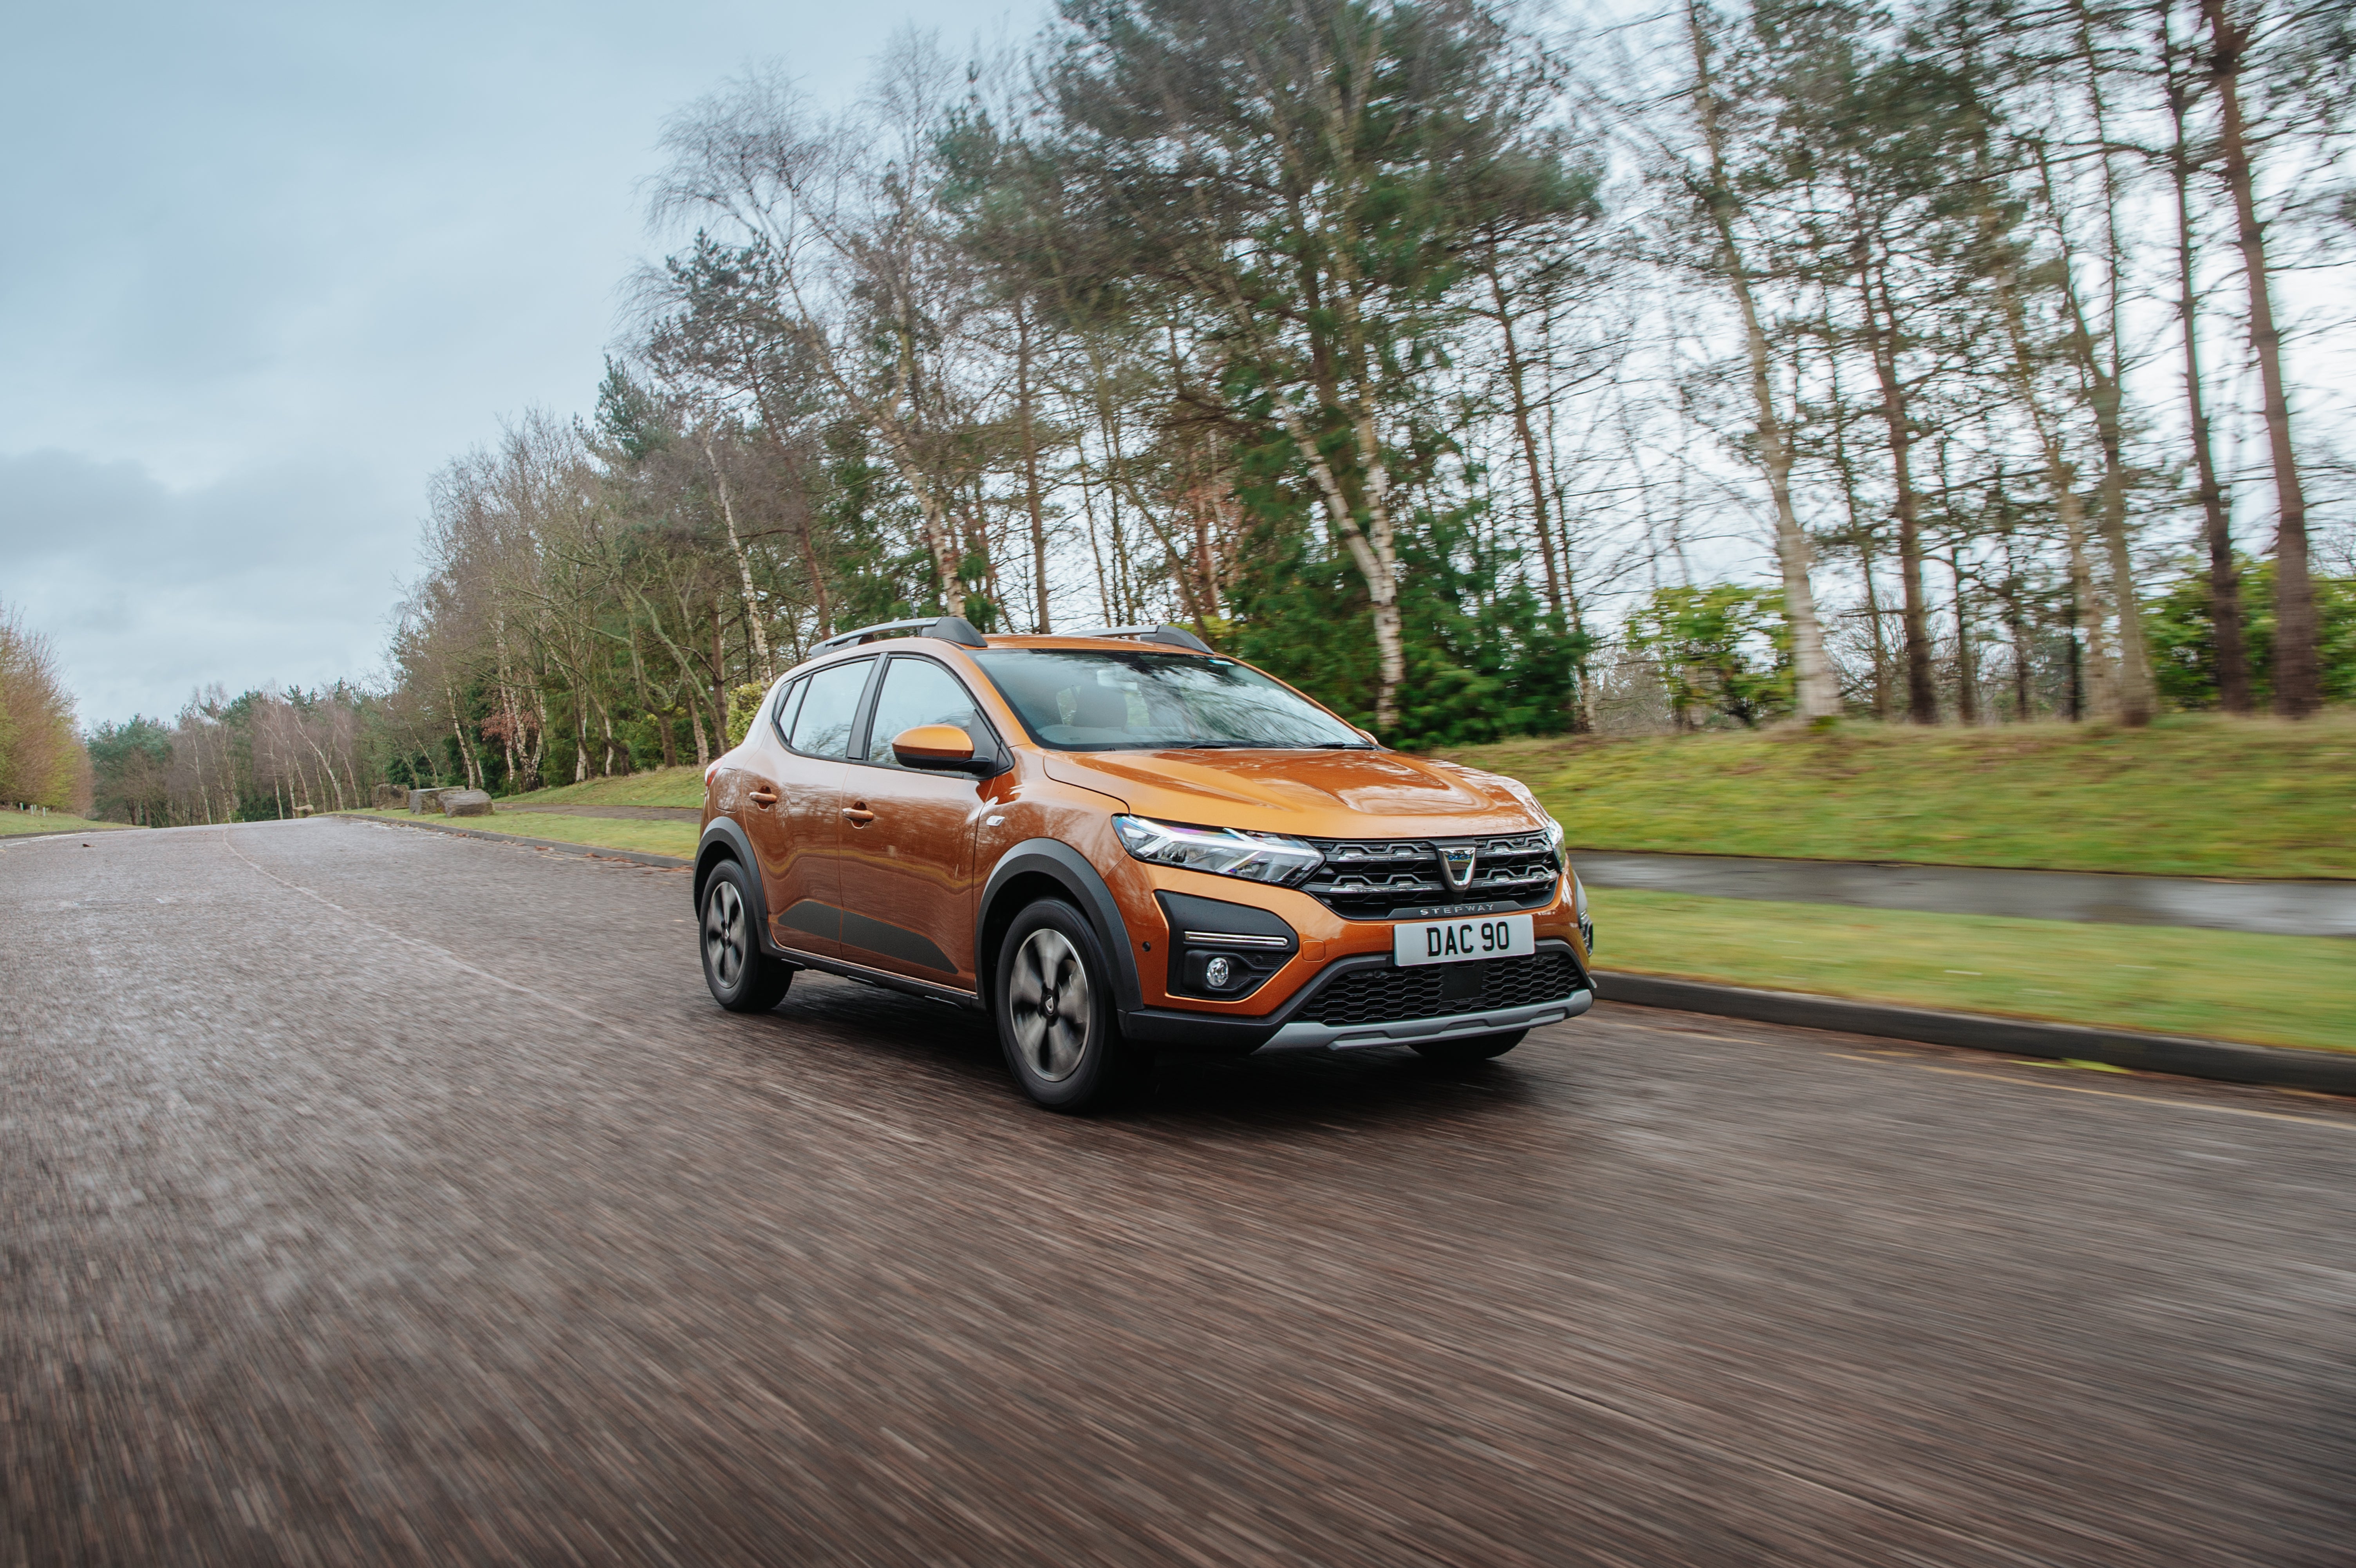 For a range that starts at £7,995 in truly basic trim, the Sandero remains something of a motoring wonder